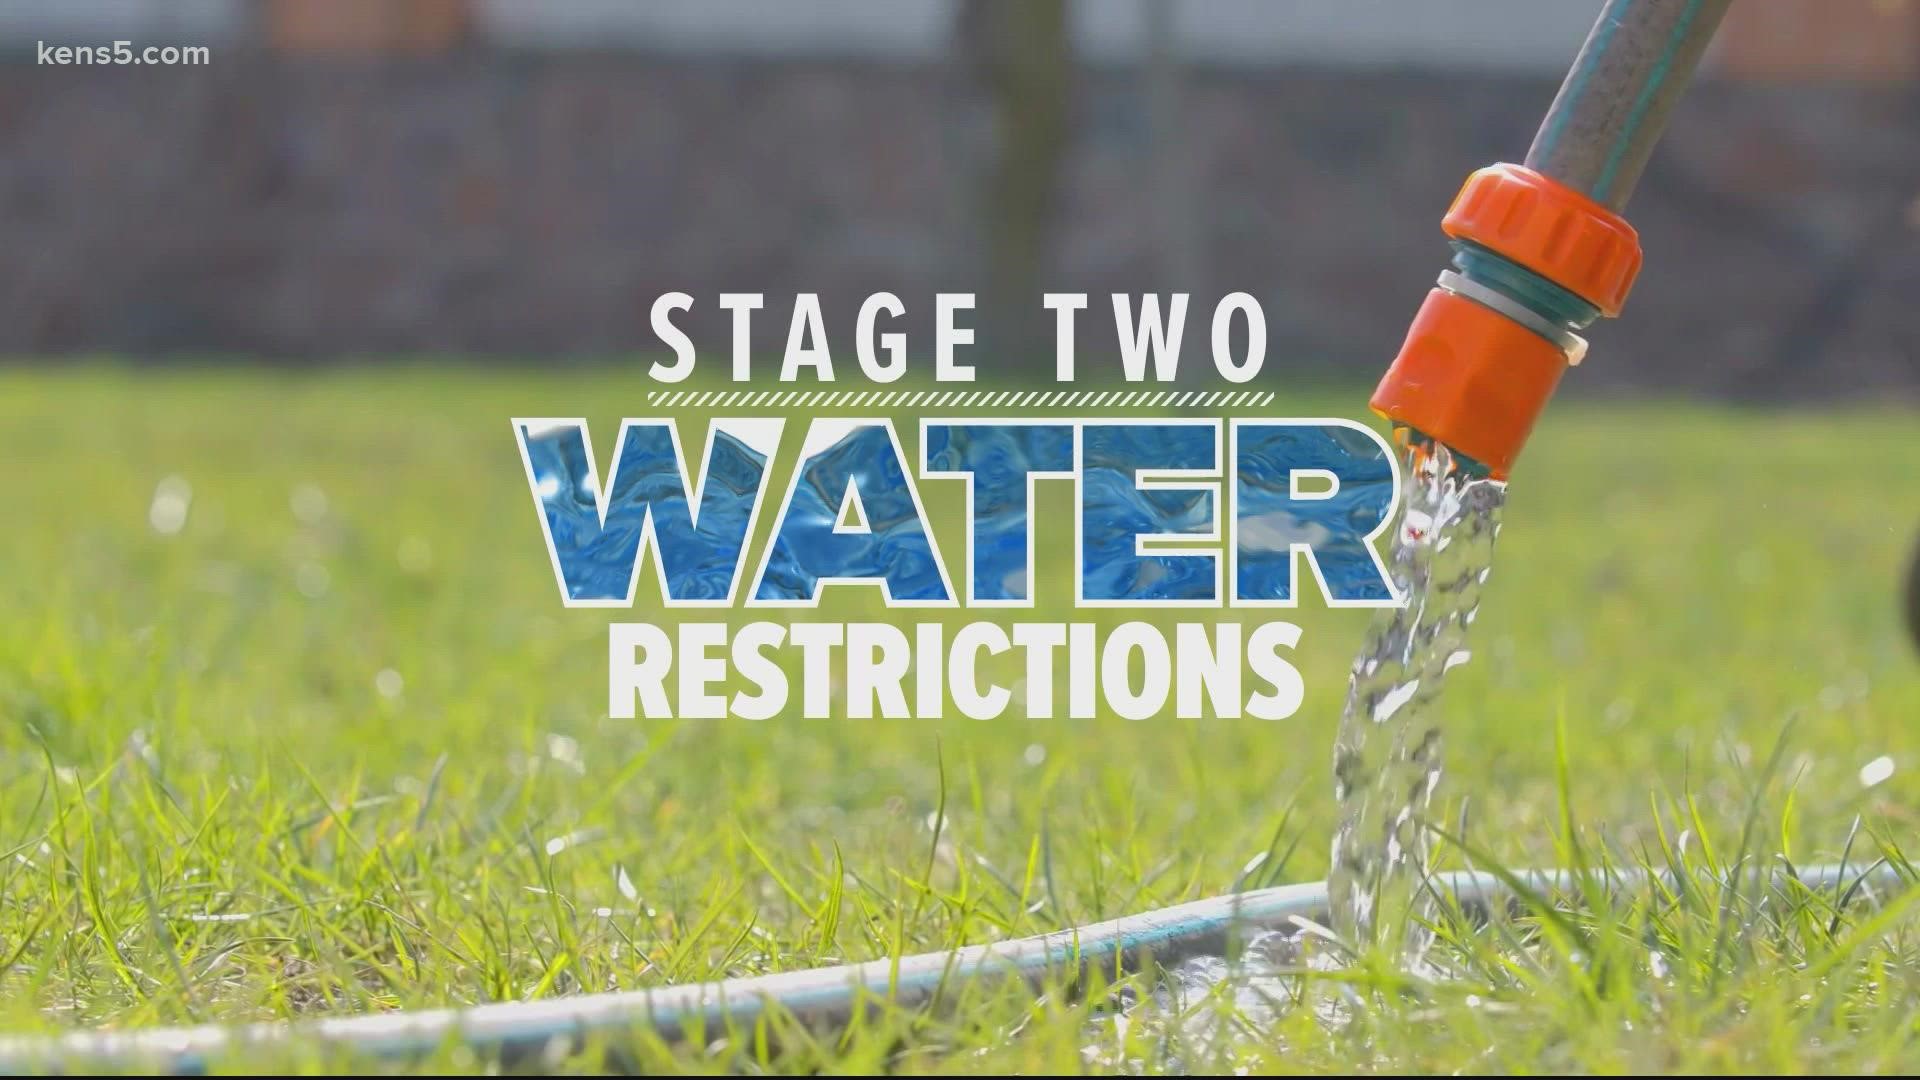 Here's what to know about Stage 2 water restrictions in San Antonio